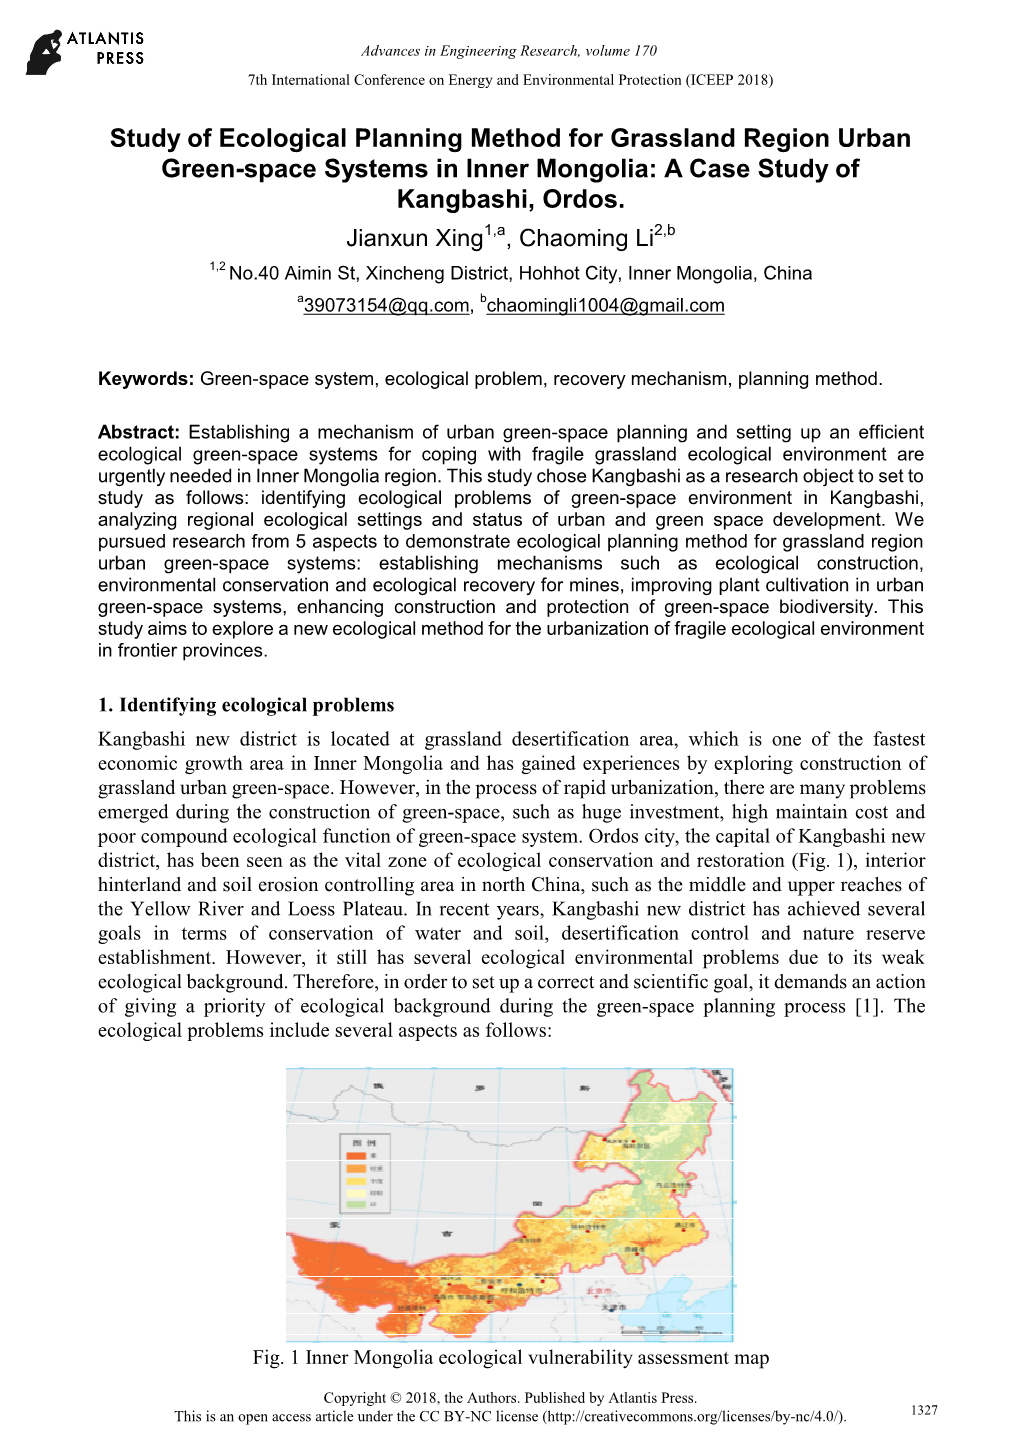 Study of Ecological Planning Method for Grassland Region Urban Green-Space Systems in Inner Mongolia: a Case Study of Kangbashi, Ordos